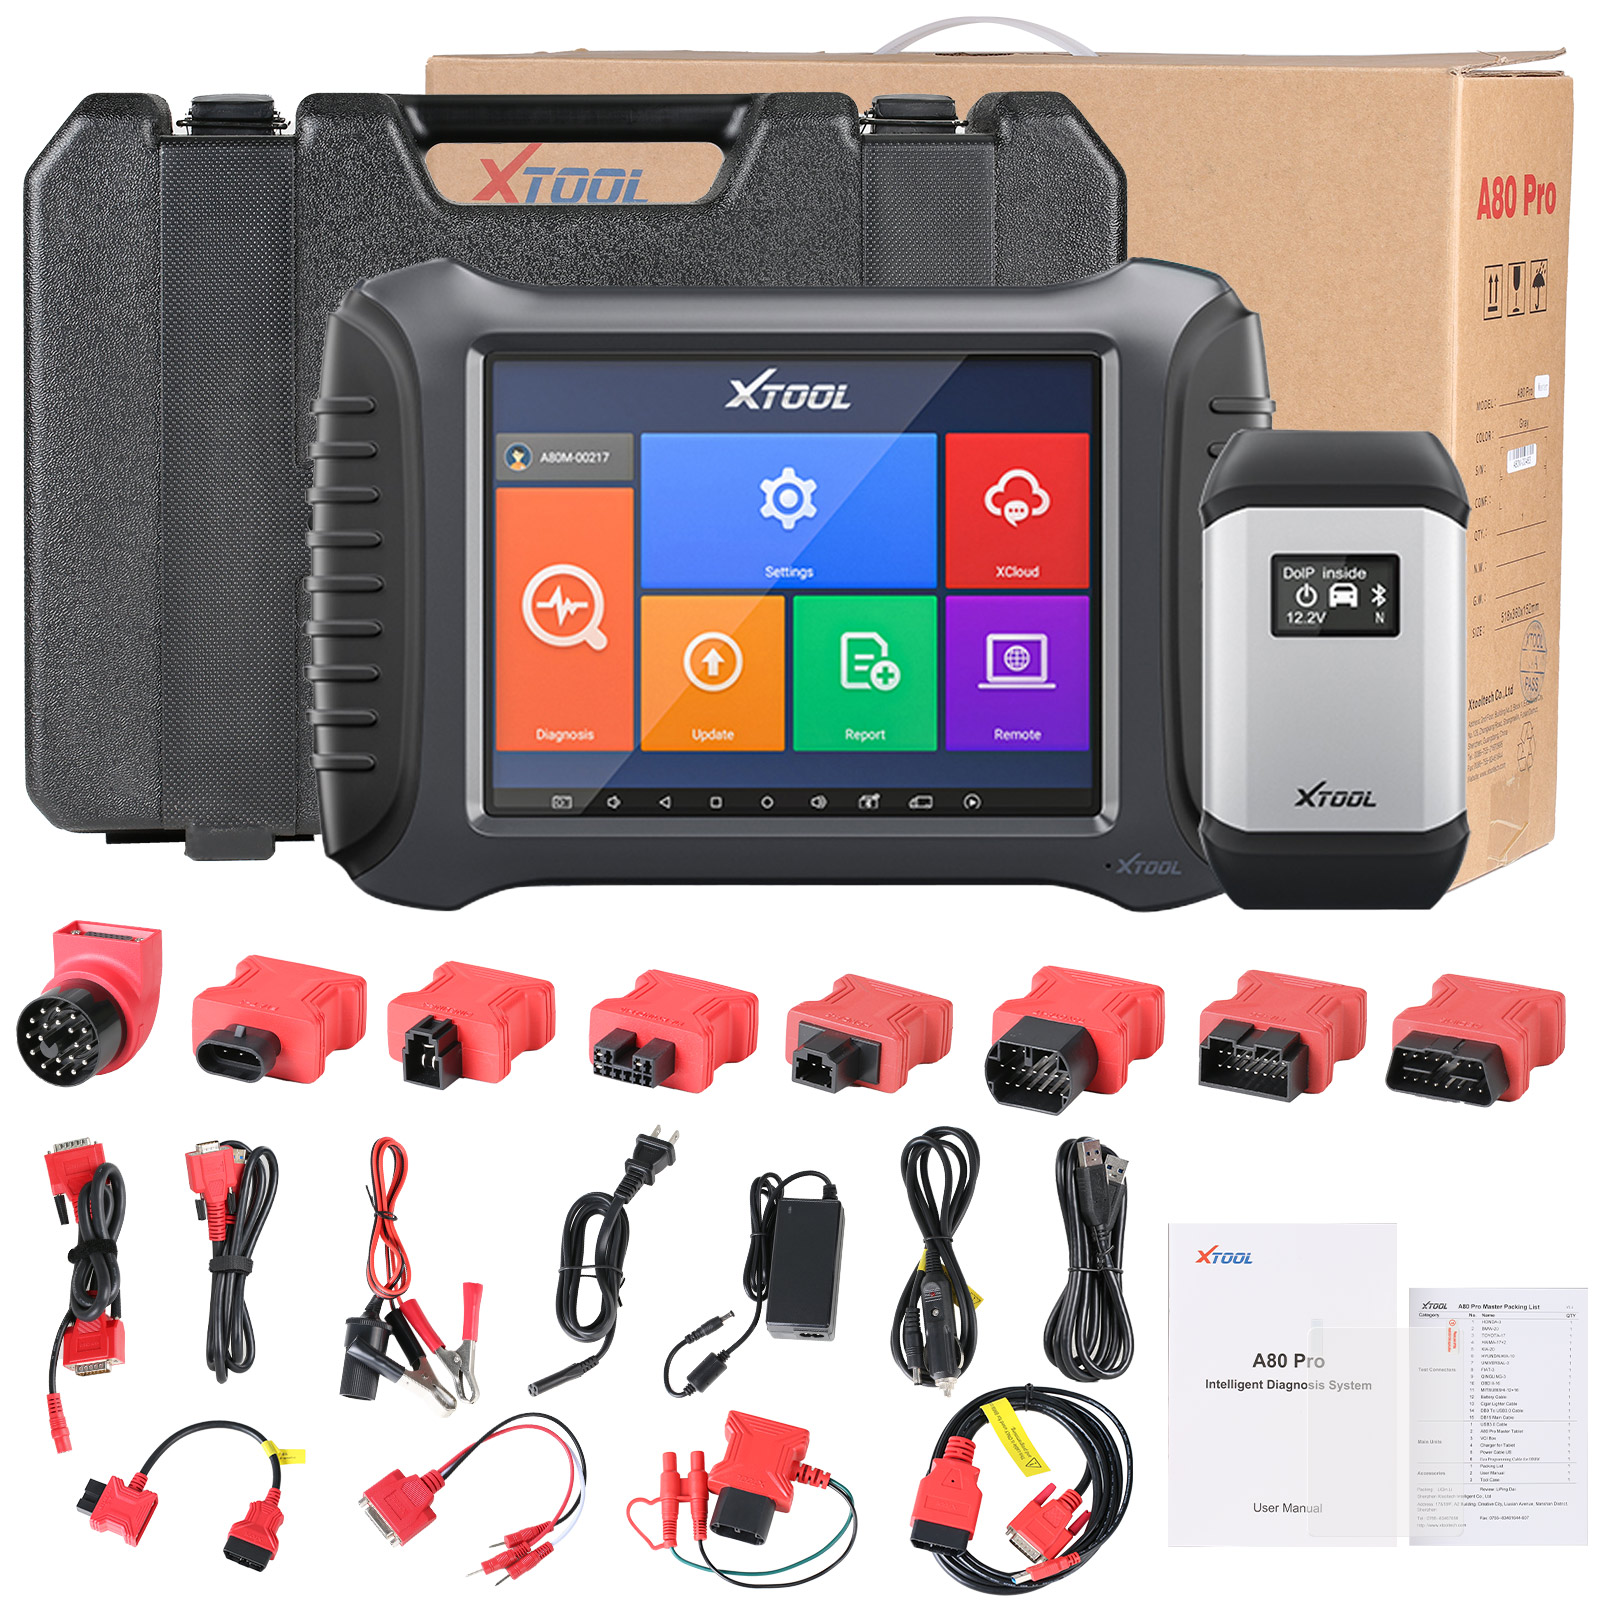 XTOOL A80 Pro package